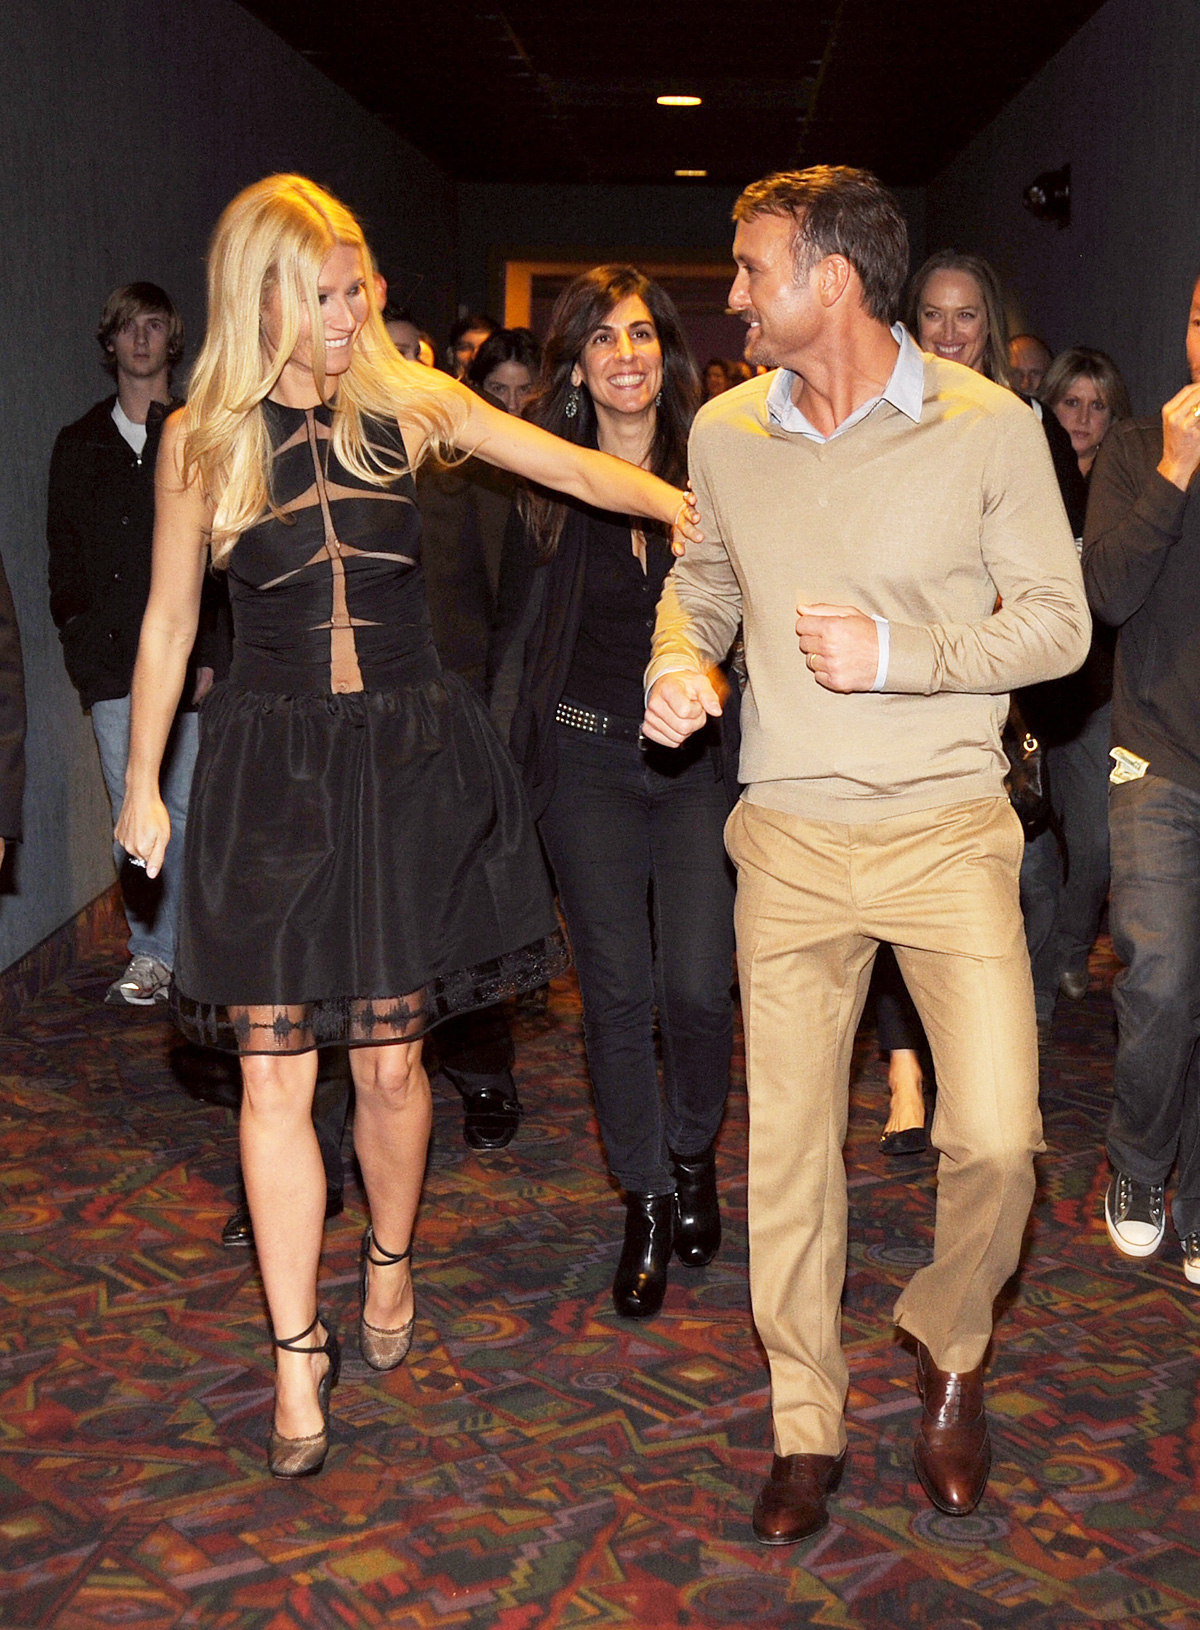 Gwyneth Paltrow and Tim McGraw at "Country Strong" premiere